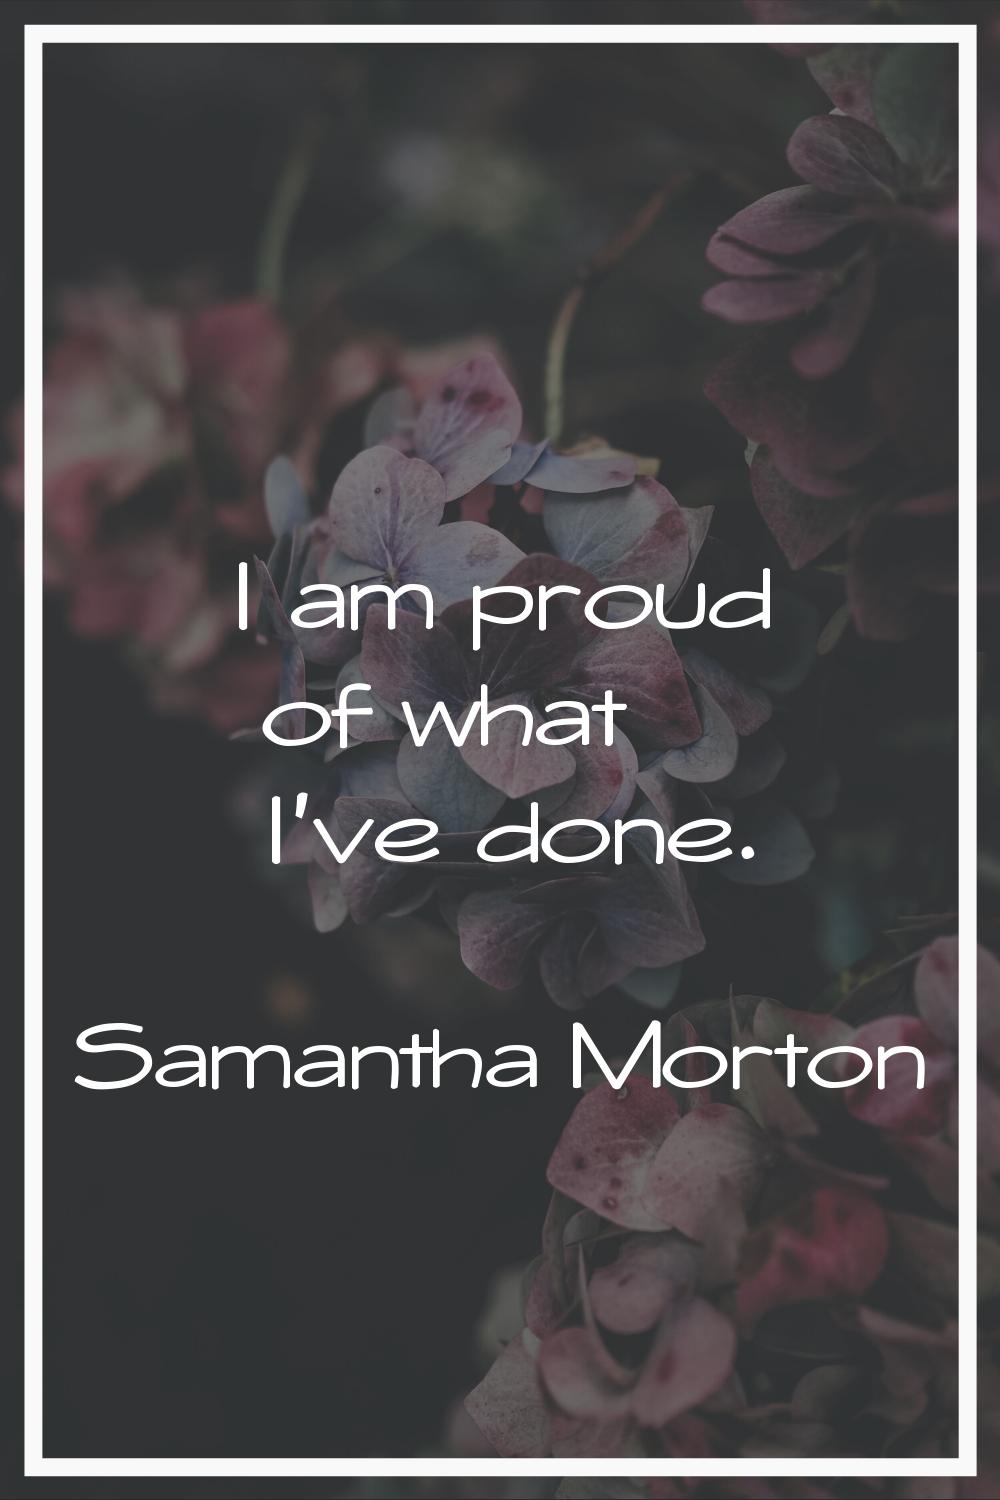 I am proud of what I've done.